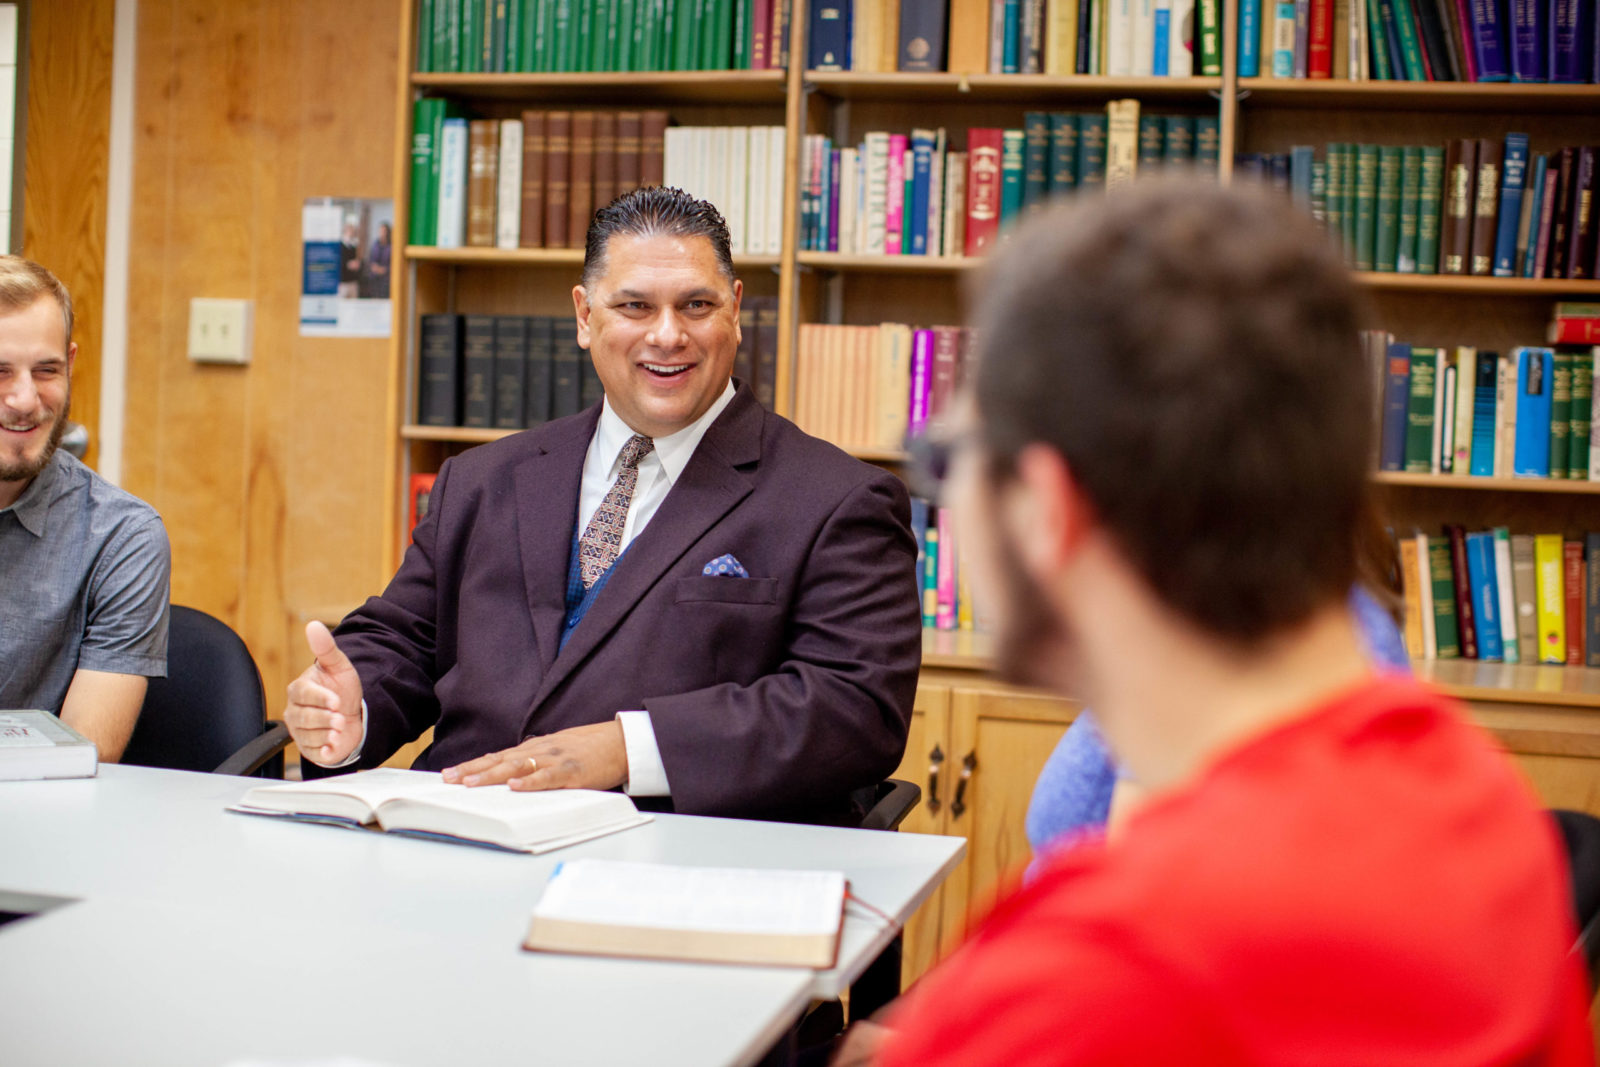 The Pastoral Studies MDiv prepares individuals for pastoral ministry. A pastoral degree gives exegetical, theological, and pastoral training.